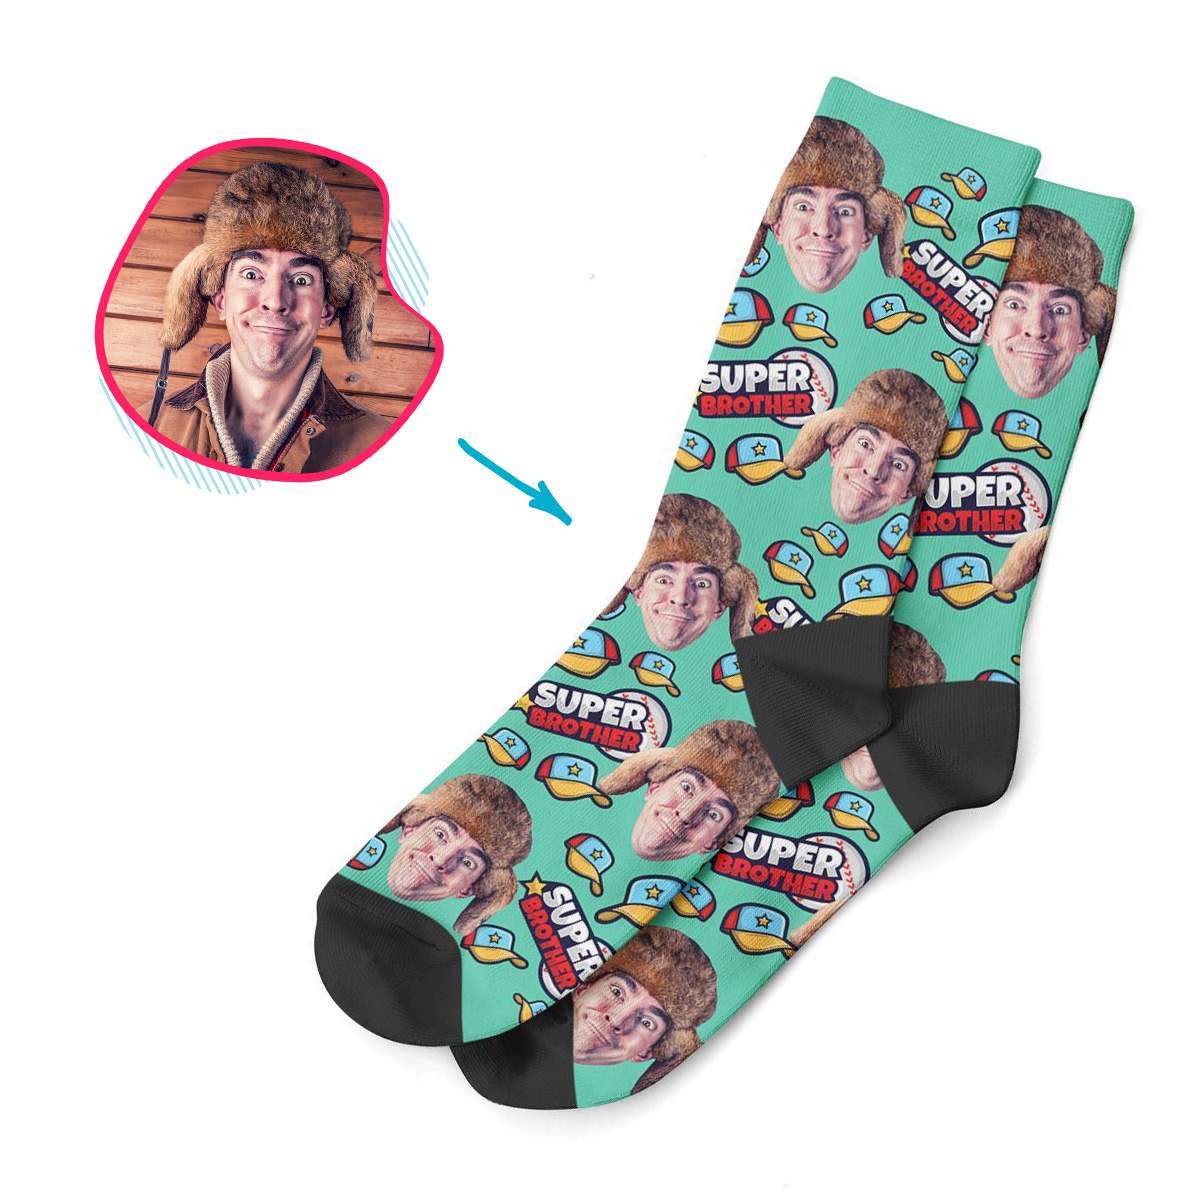 mint Super Brother socks personalized with photo of face printed on them